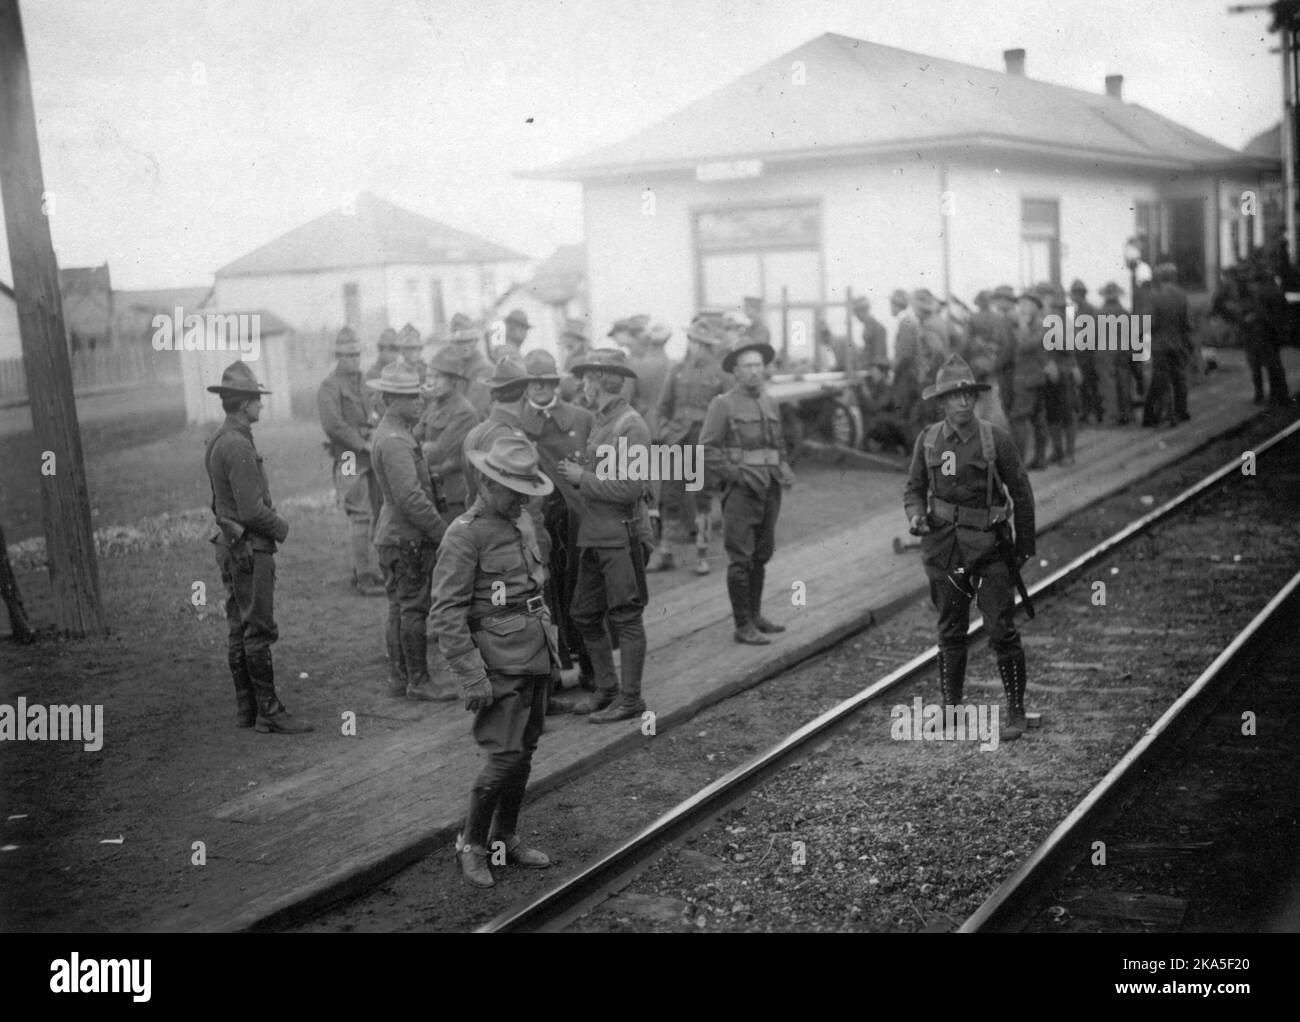 Federal Army soldiers arrive at the Colorado & Southern rail stop at Ludlow, Colorado. The deployment of federal troops effectively closed the 10-Day War stage of the Colorado Coalfield War, which began following the Ludlow Massacre on 20 April 1914. Stock Photo